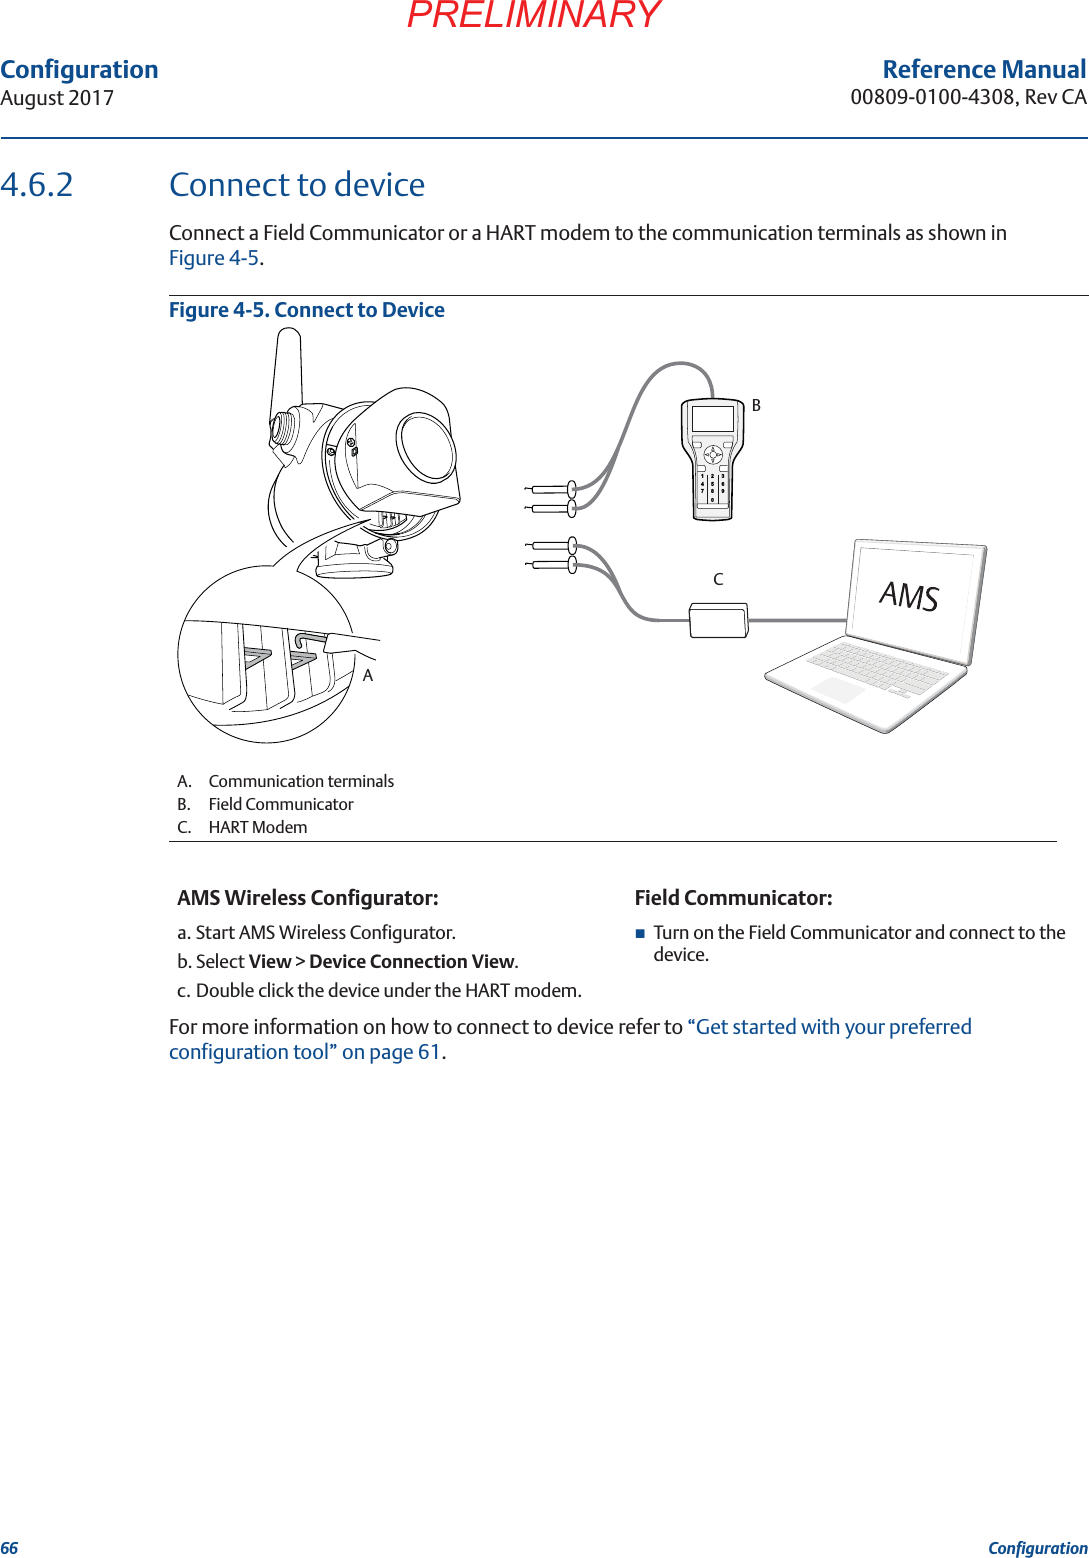 66ConfigurationAugust 2017ConfigurationPRELIMINARYReference Manual00809-0100-4308, Rev CA4.6.2 Connect to deviceConnect a Field Communicator or a HART modem to the communication terminals as shown in Figure 4-5.Figure 4-5. Connect to DeviceFor more information on how to connect to device refer to “Get started with your preferred configuration tool” on page 61.A. Communication terminalsB. Field CommunicatorC. HART ModemAMS Wireless Configurator: Field Communicator:a. Start AMS Wireless Configurator.b. Select View &gt; Device Connection View.c. Double click the device under the HART modem.Turn on the Field Communicator and connect to the device.12 345 67809ABC